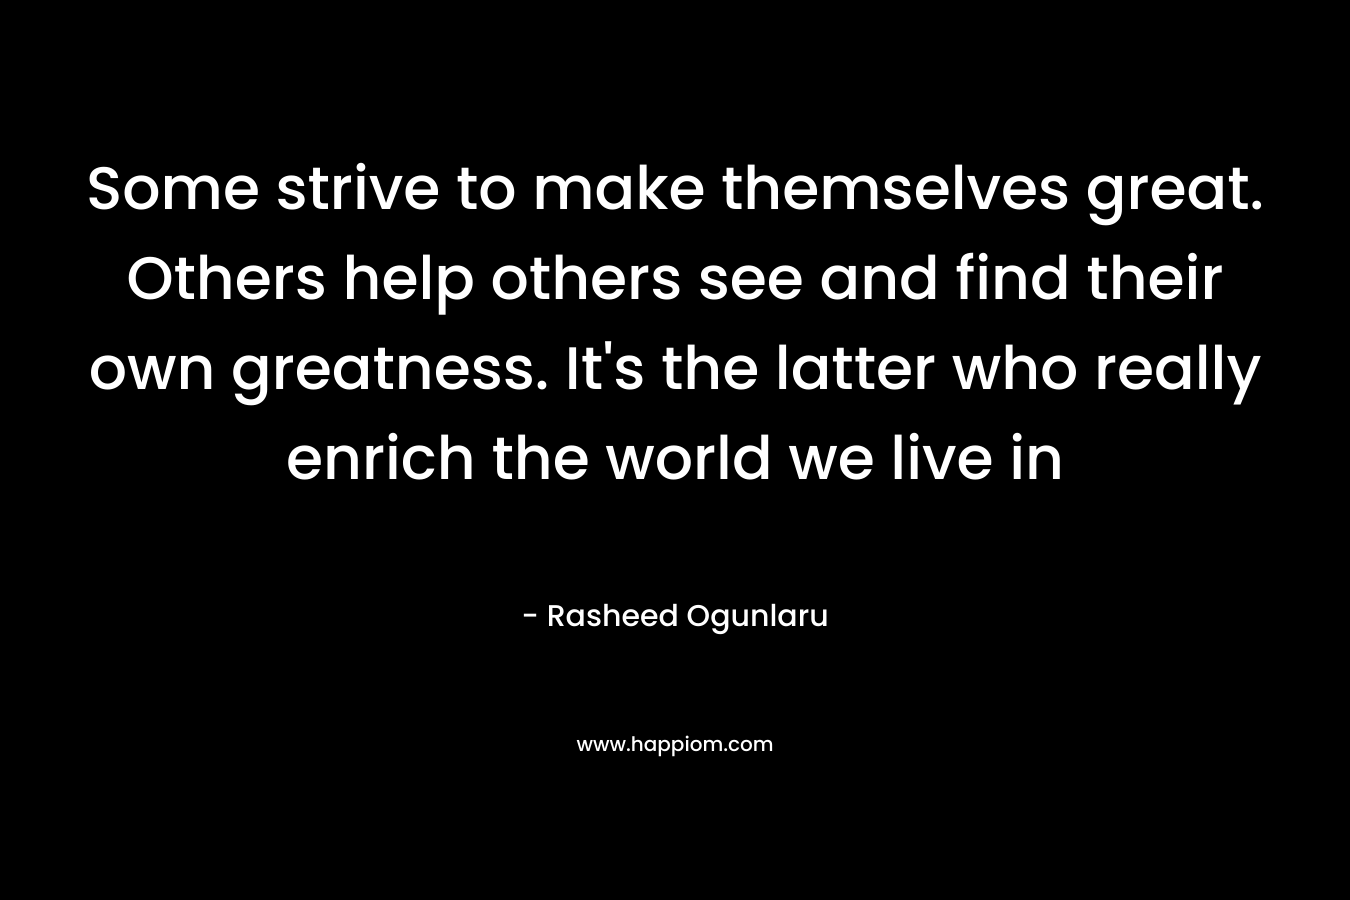 Some strive to make themselves great. Others help others see and find their own greatness. It’s the latter who really enrich the world we live in – Rasheed Ogunlaru